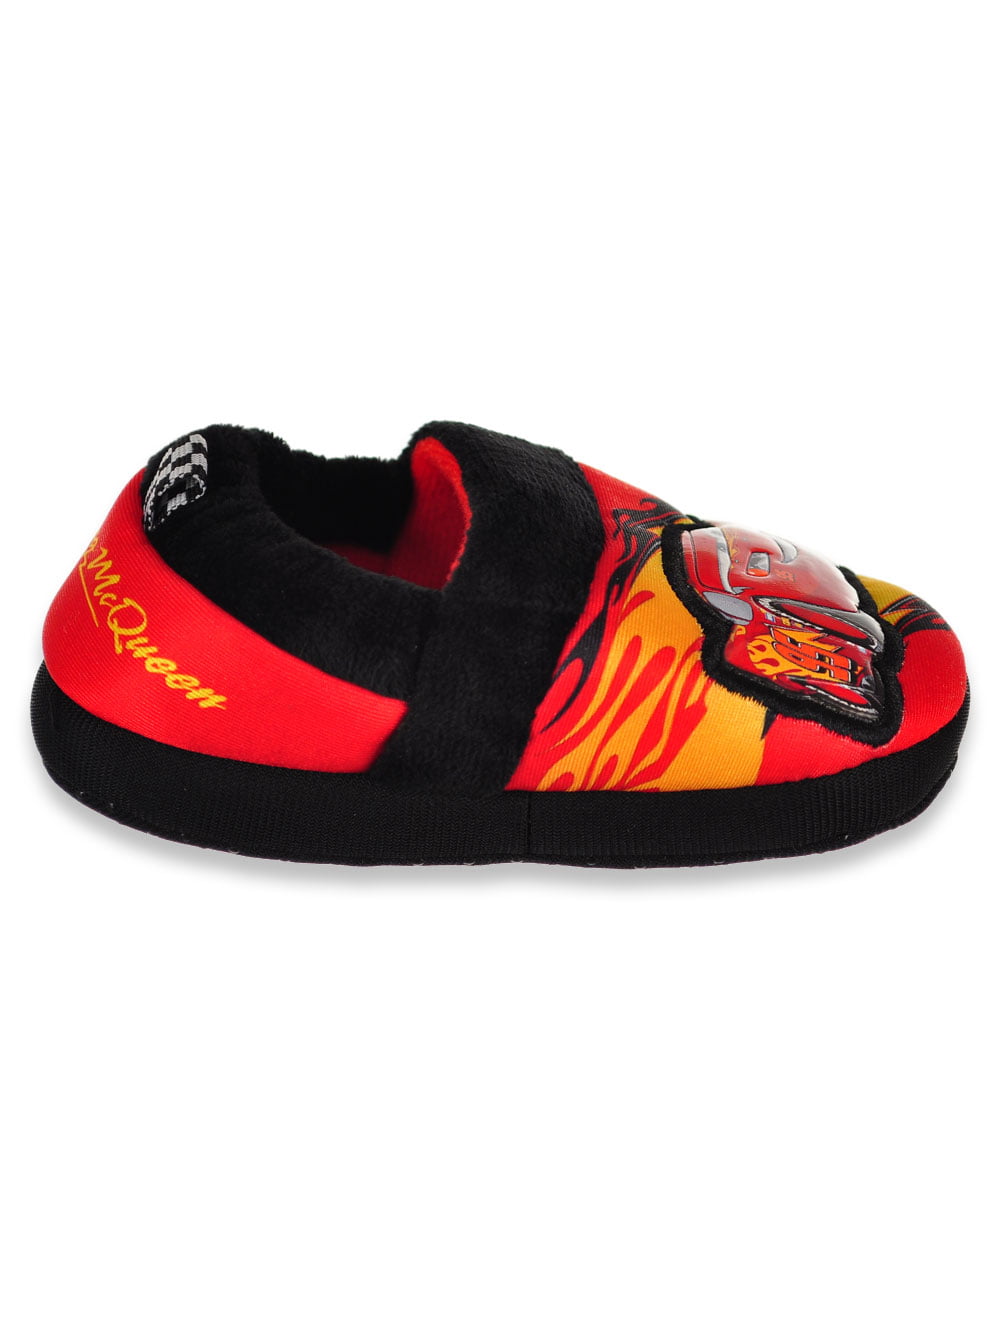 lightning mcqueen slippers adults